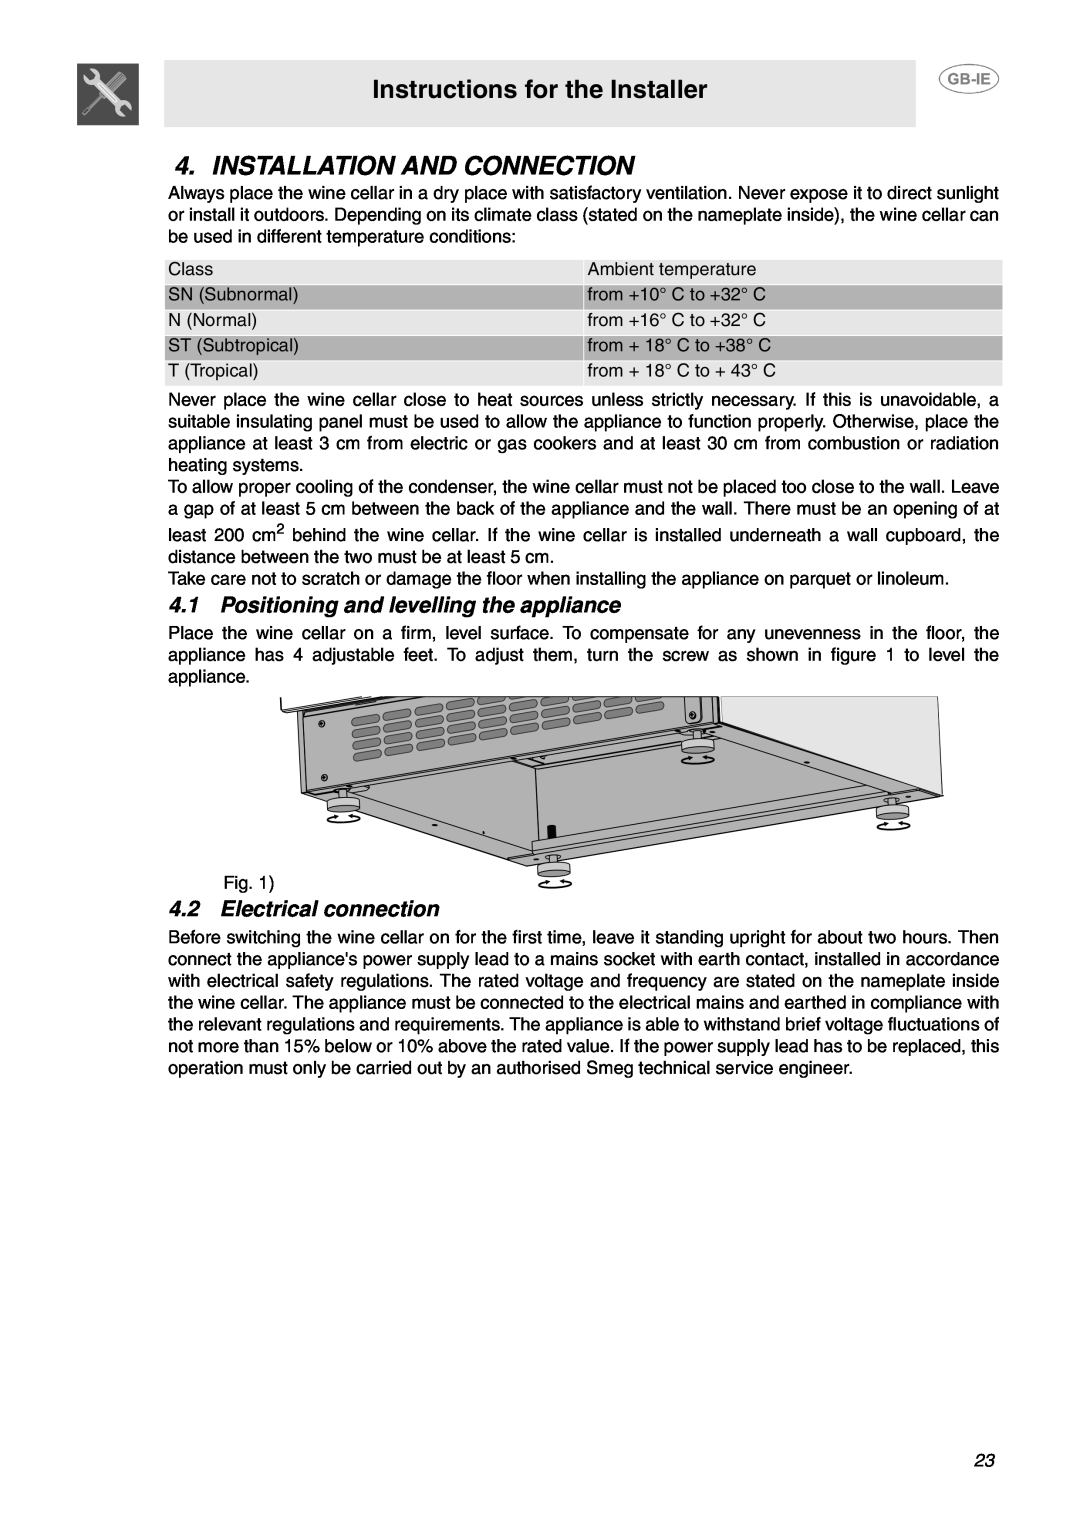 Smeg SCV36XS Instructions for the Installer, Installation And Connection, Positioning and levelling the appliance 